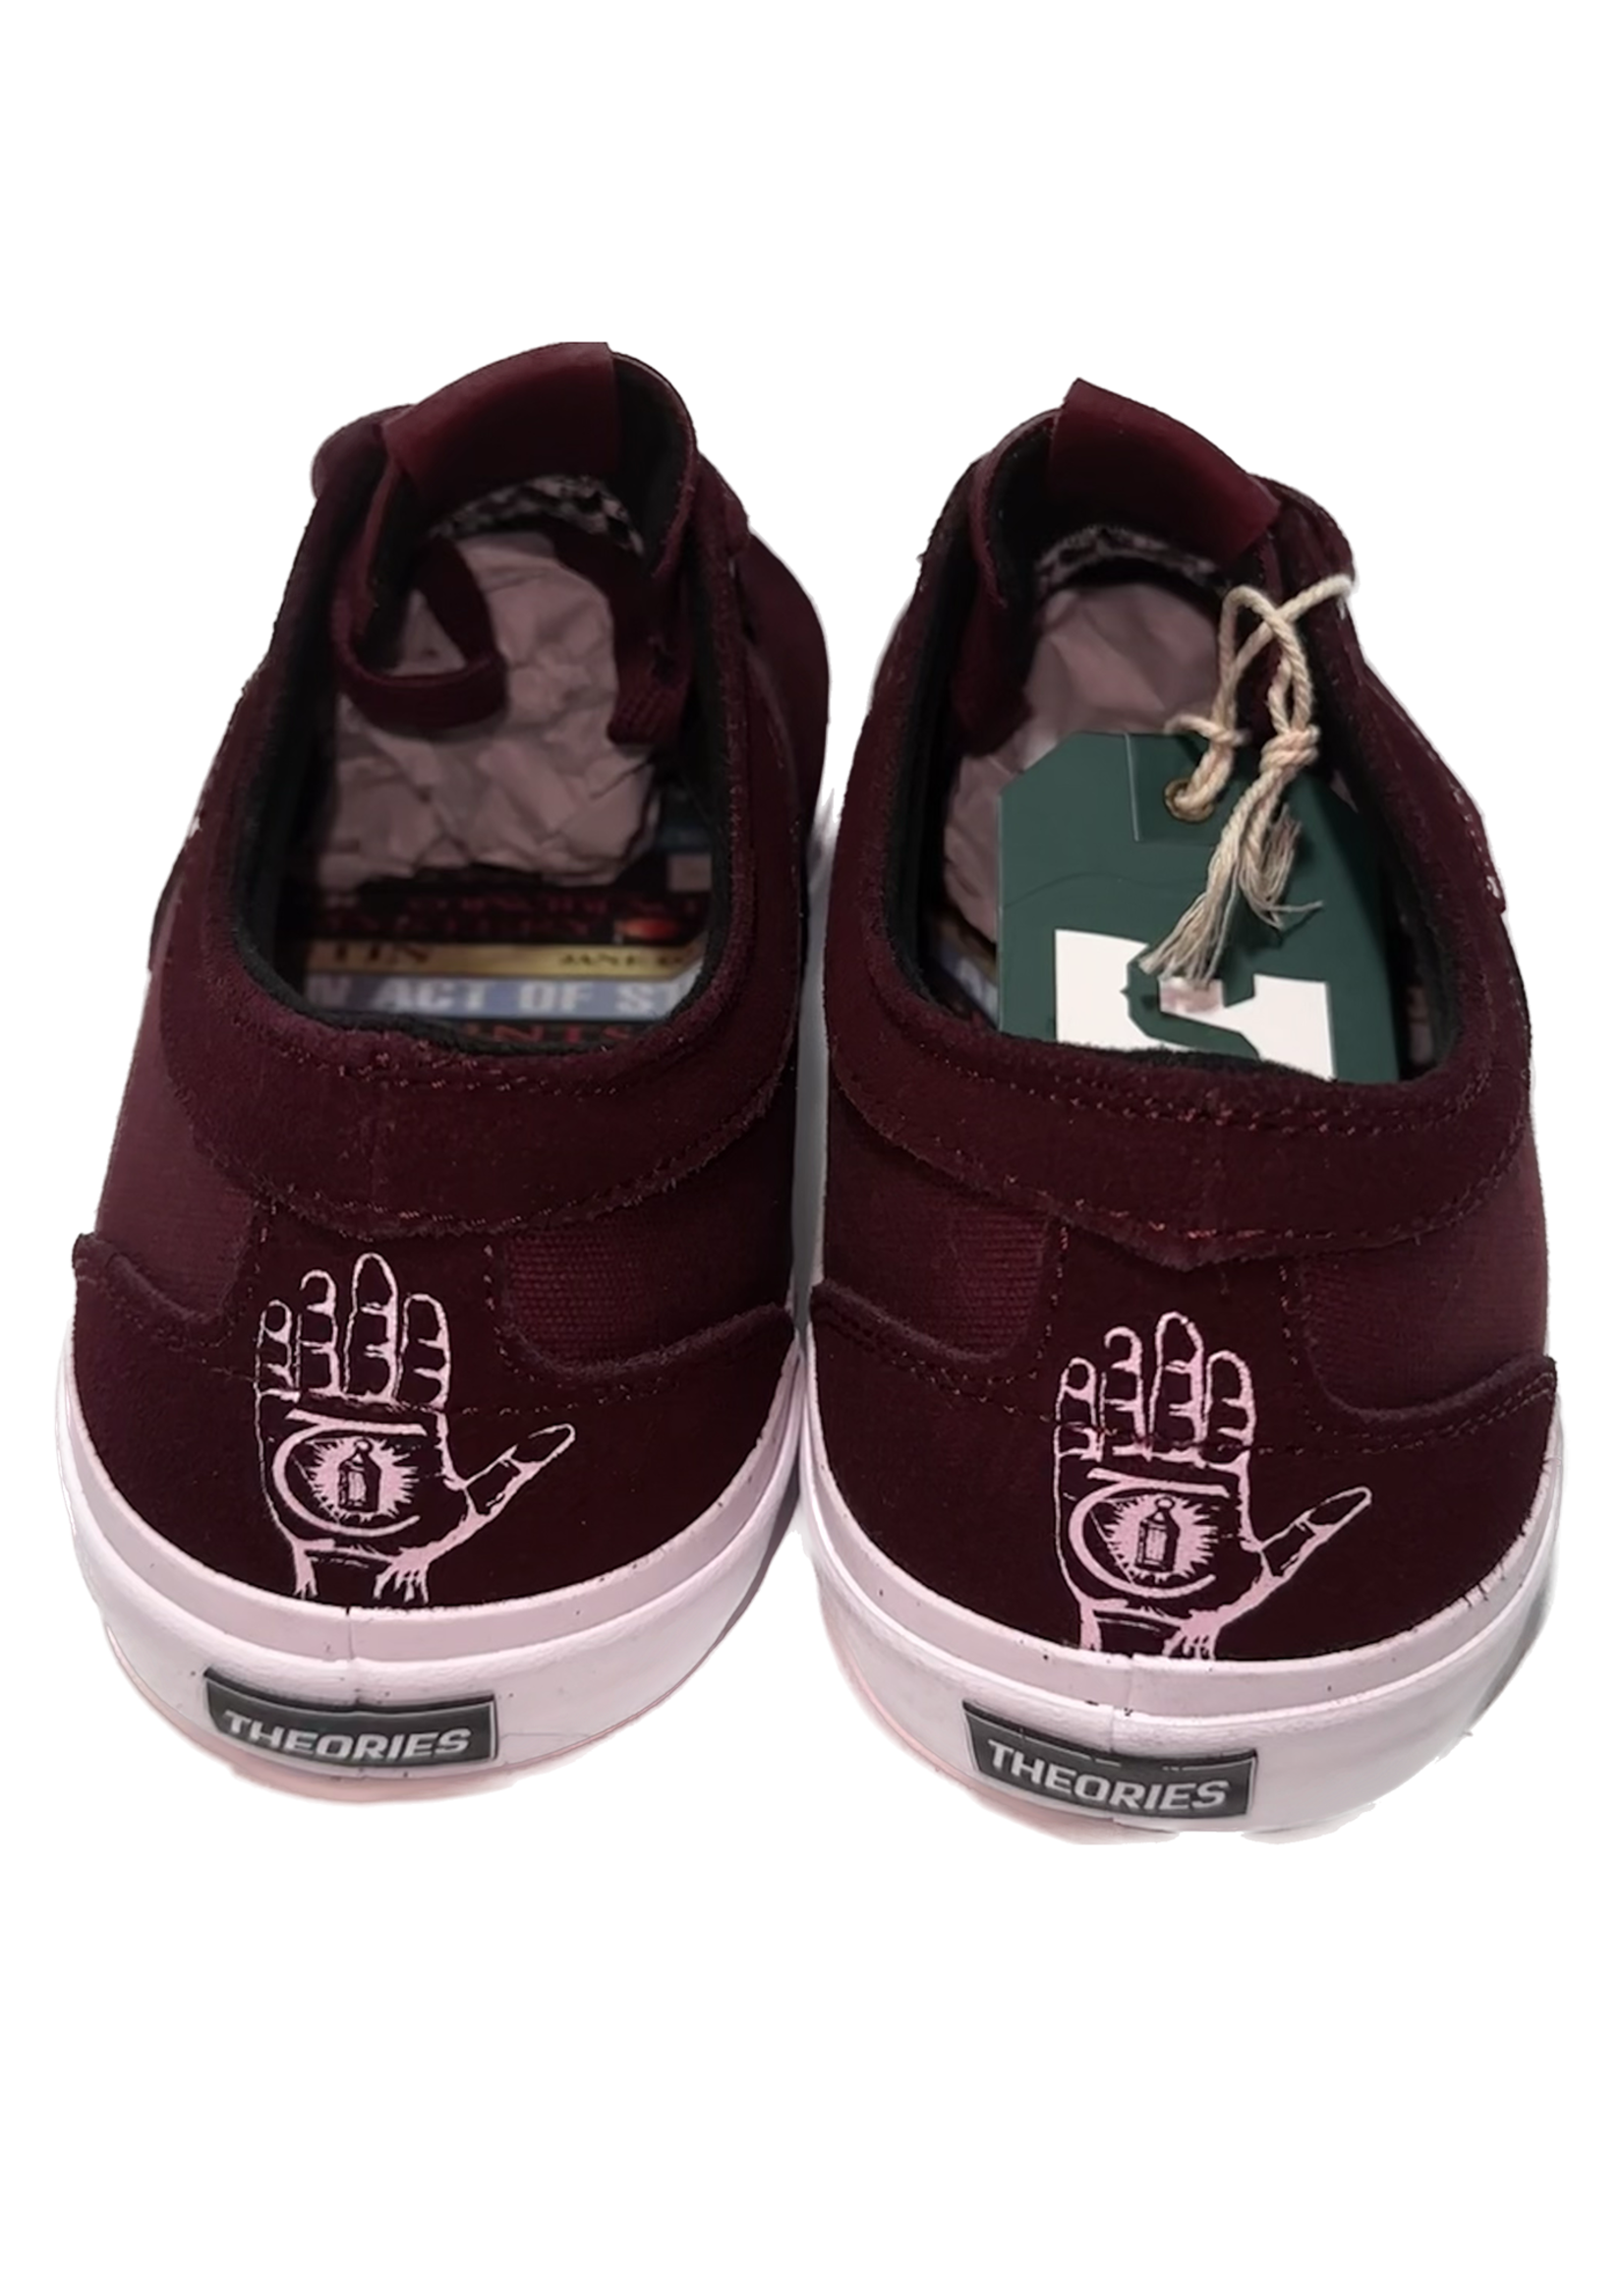 STATE FOOTWARE STATE FOOTWEAR - Bishop -THEORIES X Black Cherry Suede/Rubber Toe Size 8 USM's